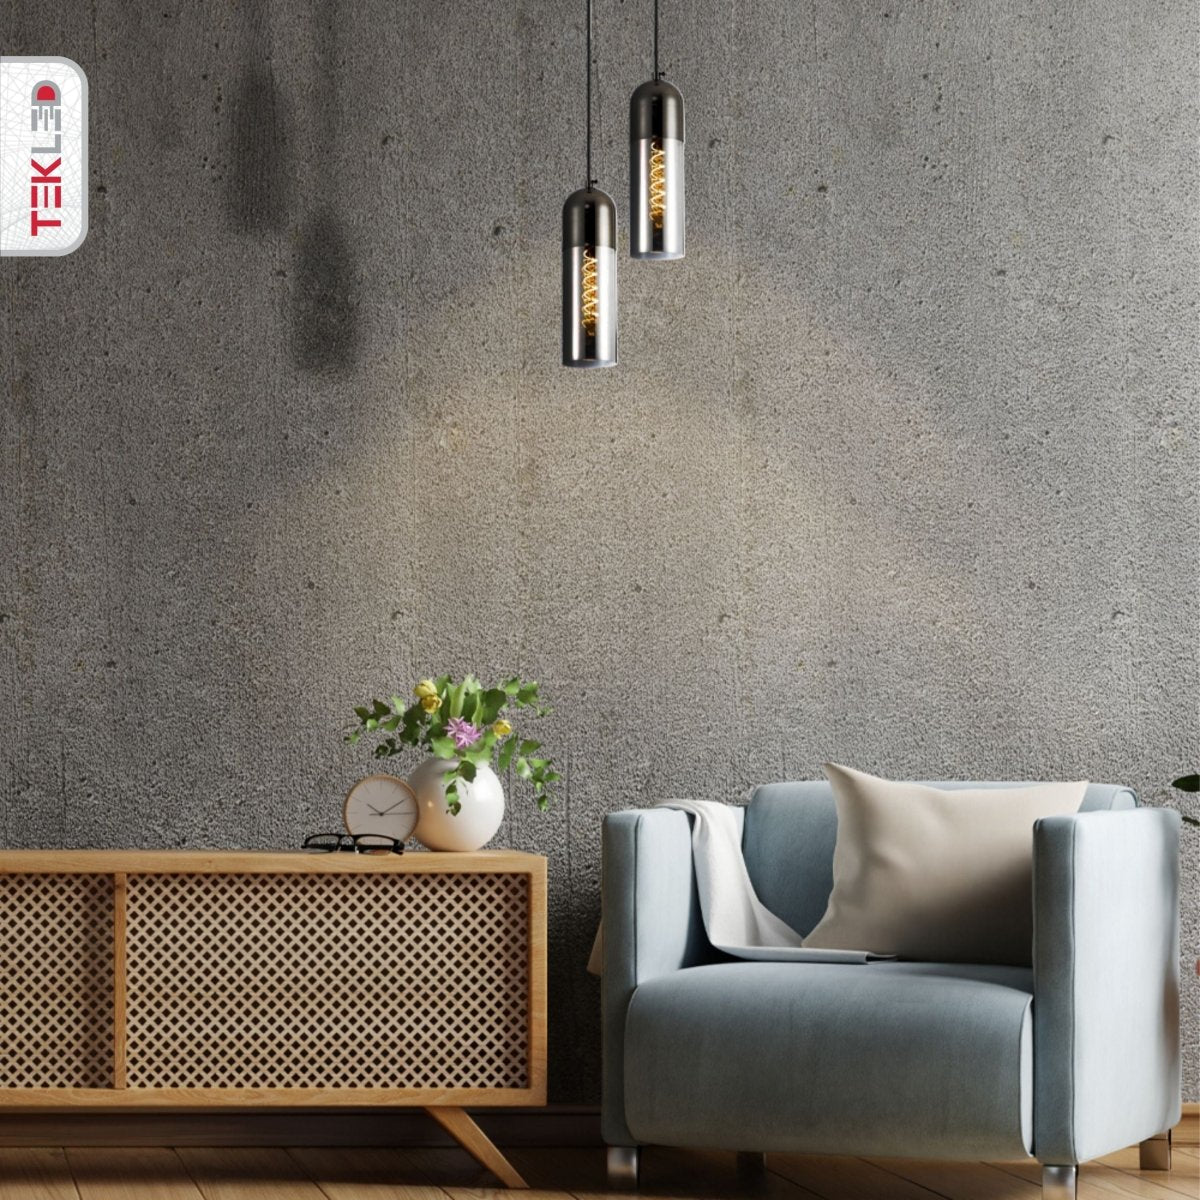 Smoky Glass Pearl Black Plated Top Cylinder Pendant Light E27 in indoor setting double usage at living room